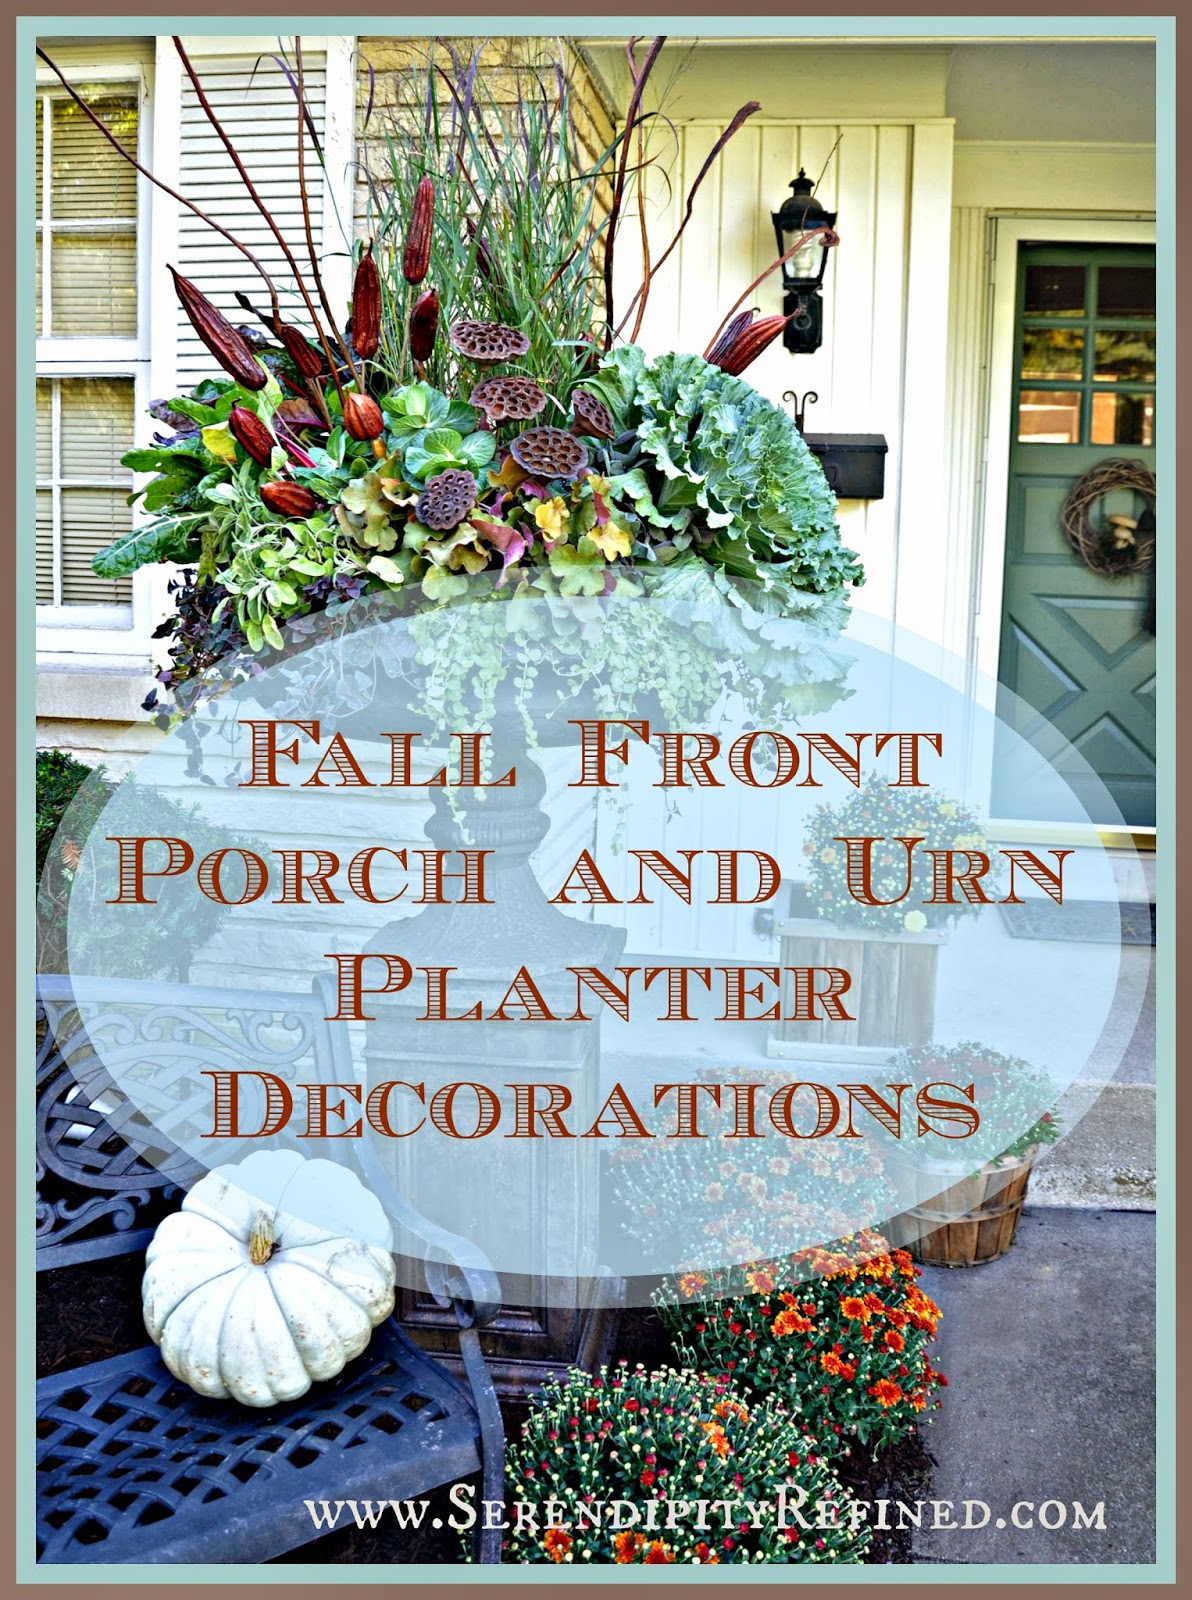 Serendipity Refined Blog: Fall Porch and Urn Decorations